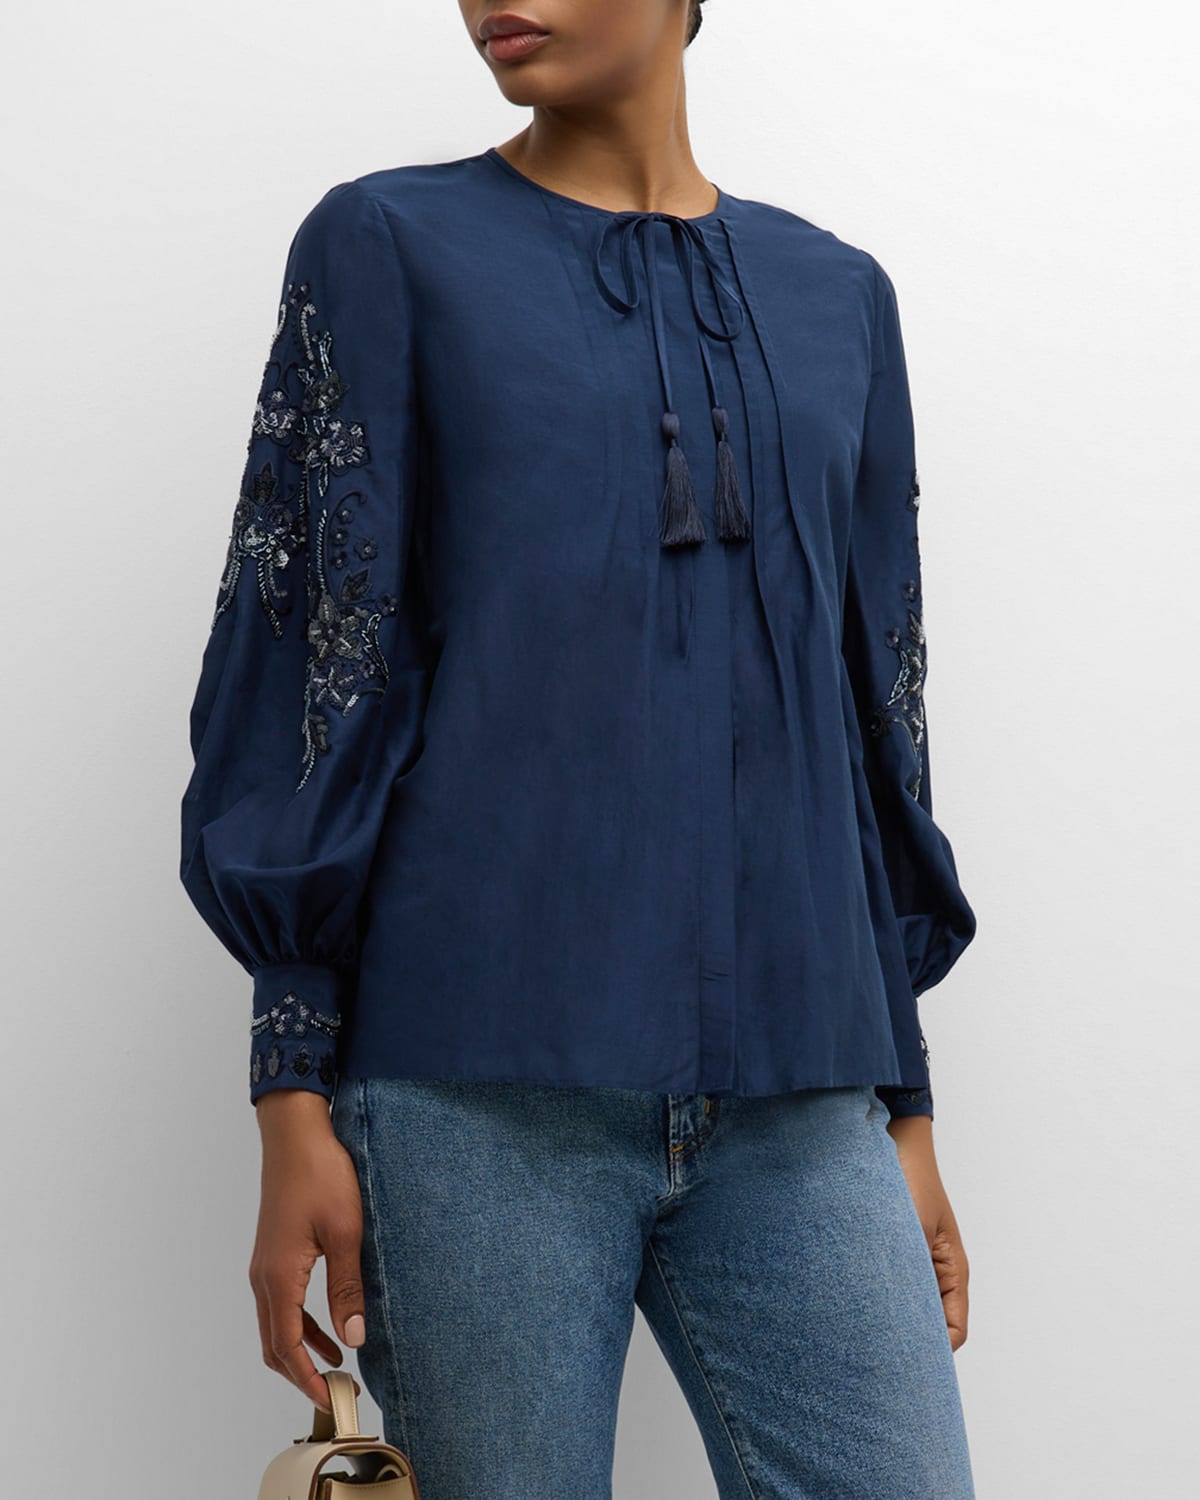 Acacia Sequin Floral-Embroidered Blouse